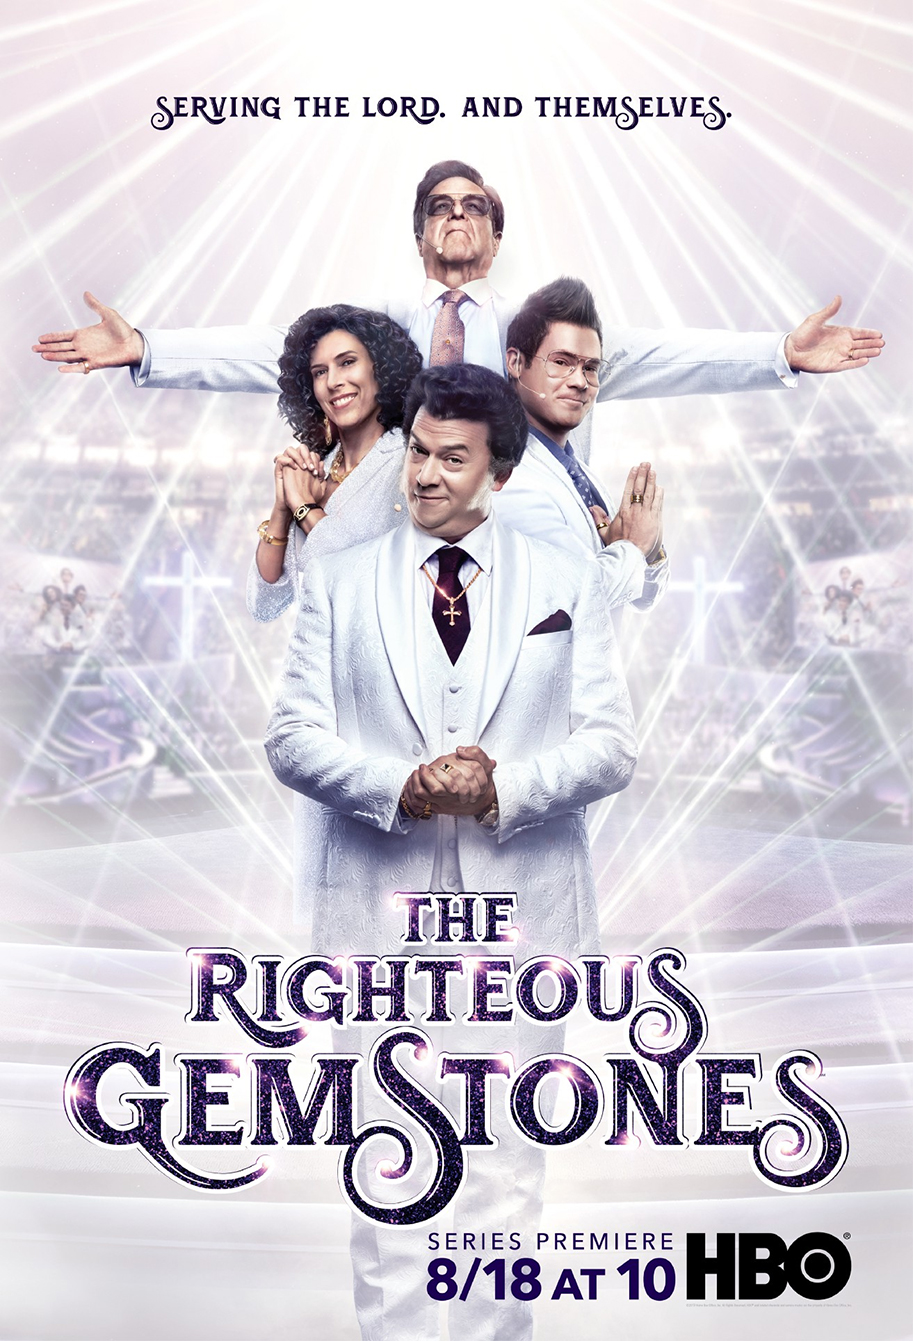 The Righteous Gemstones, HBO, Danny McBride, comedy, poster